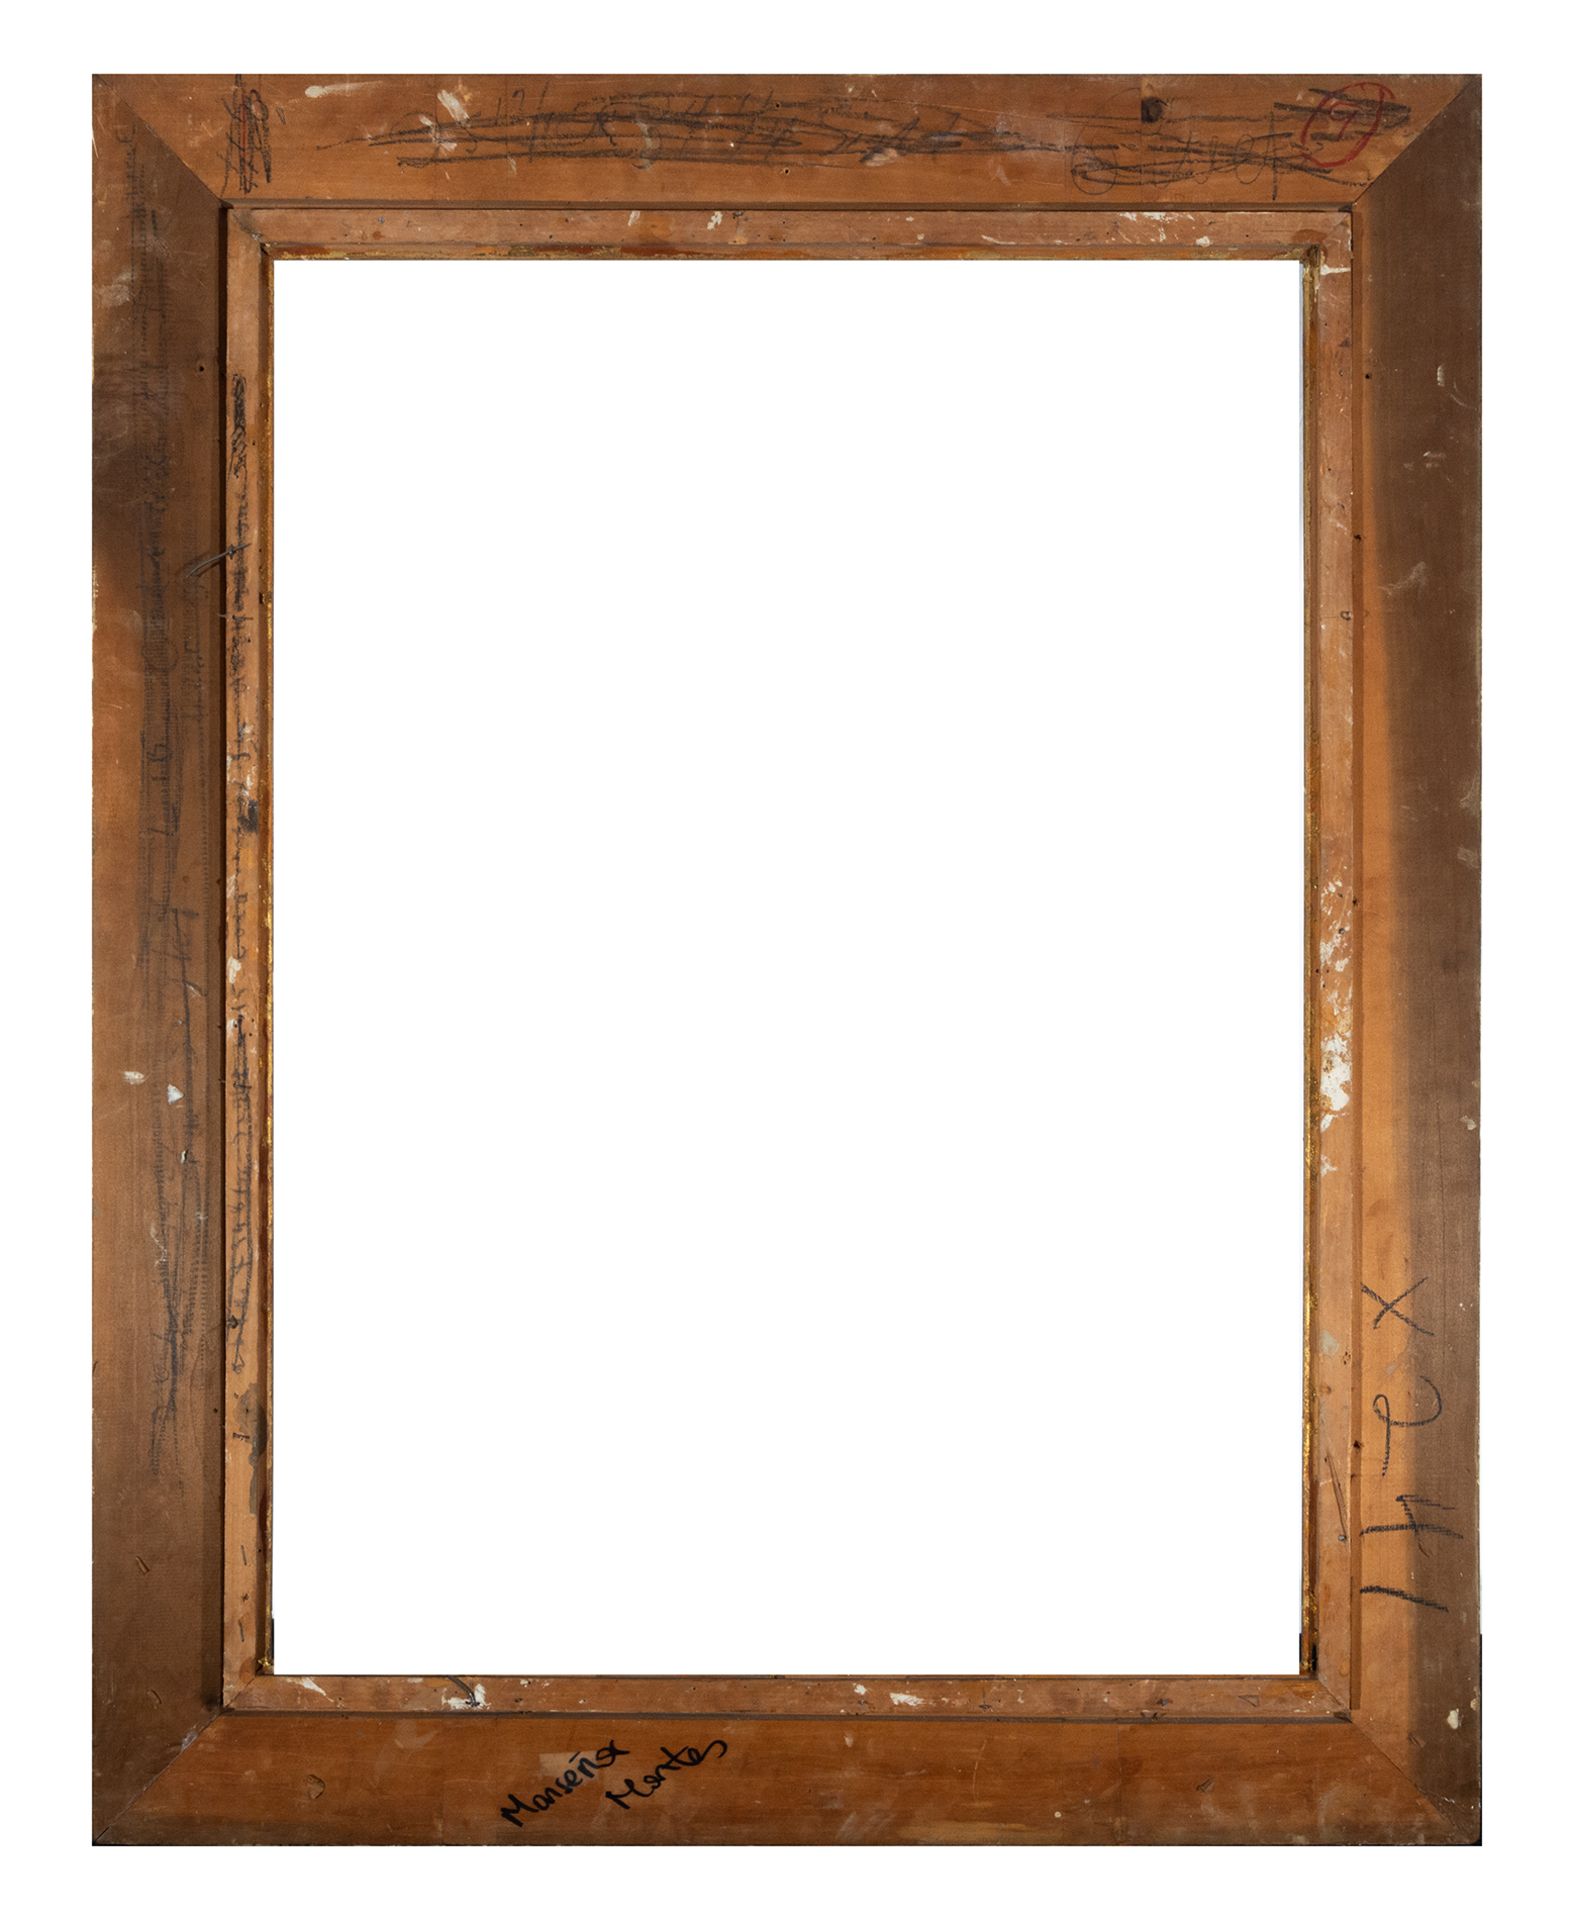 French Louis XV style frame in wood and gilt trim, late 19th century - Image 2 of 2